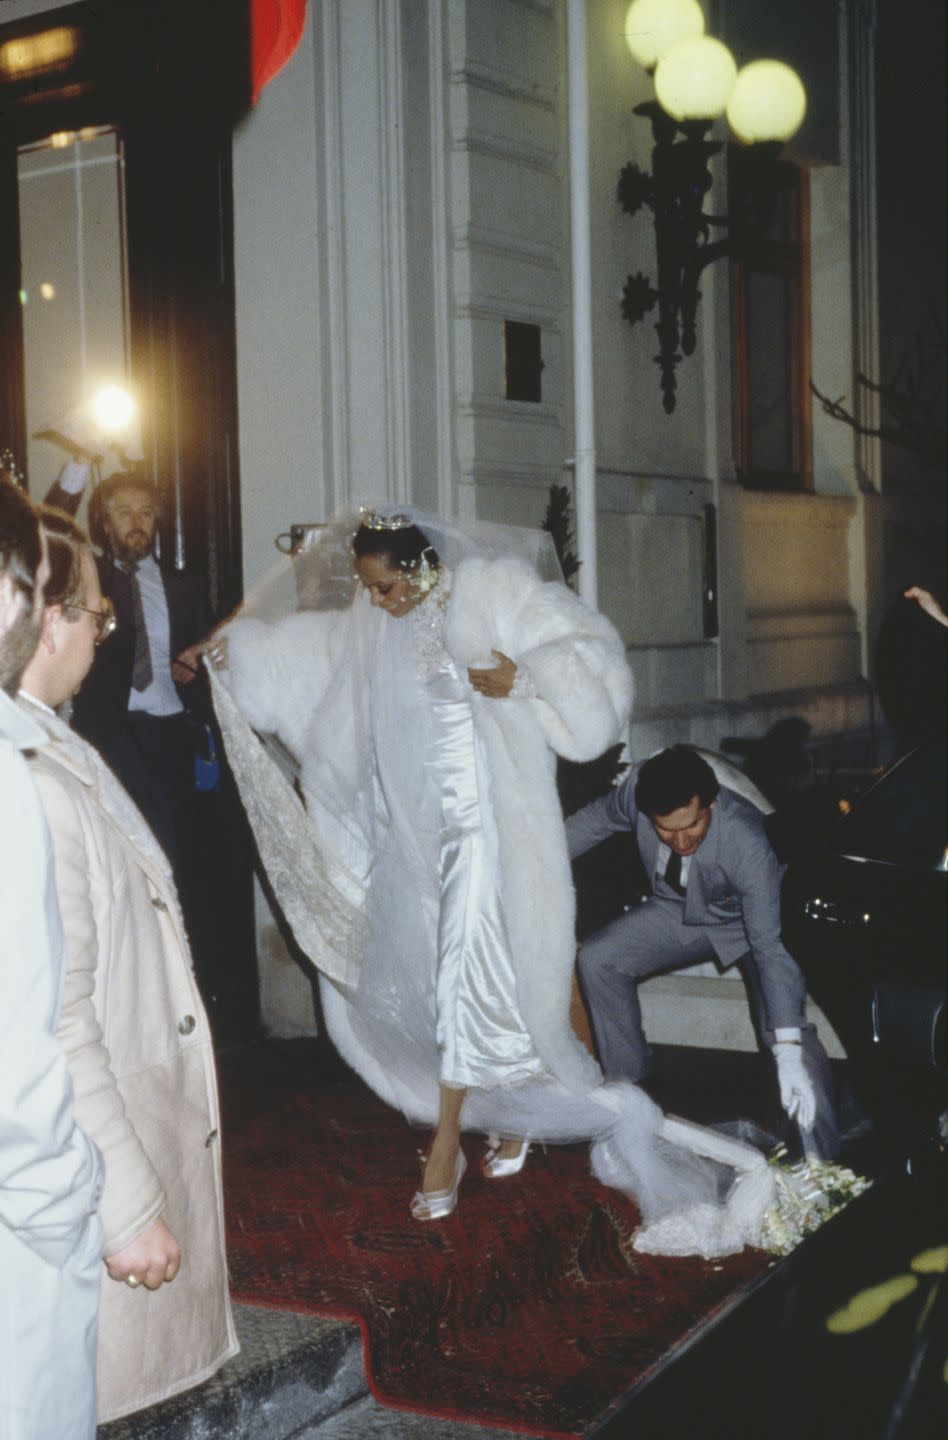 <p>Diana Ross wears a full-length white fur coat to her February nuptials in Romainmotier, Switzerland to Norwegian businessman Arne Naess Jr. The Queen of Motown gets help with her tangled satin and lace dress on her way in.</p>